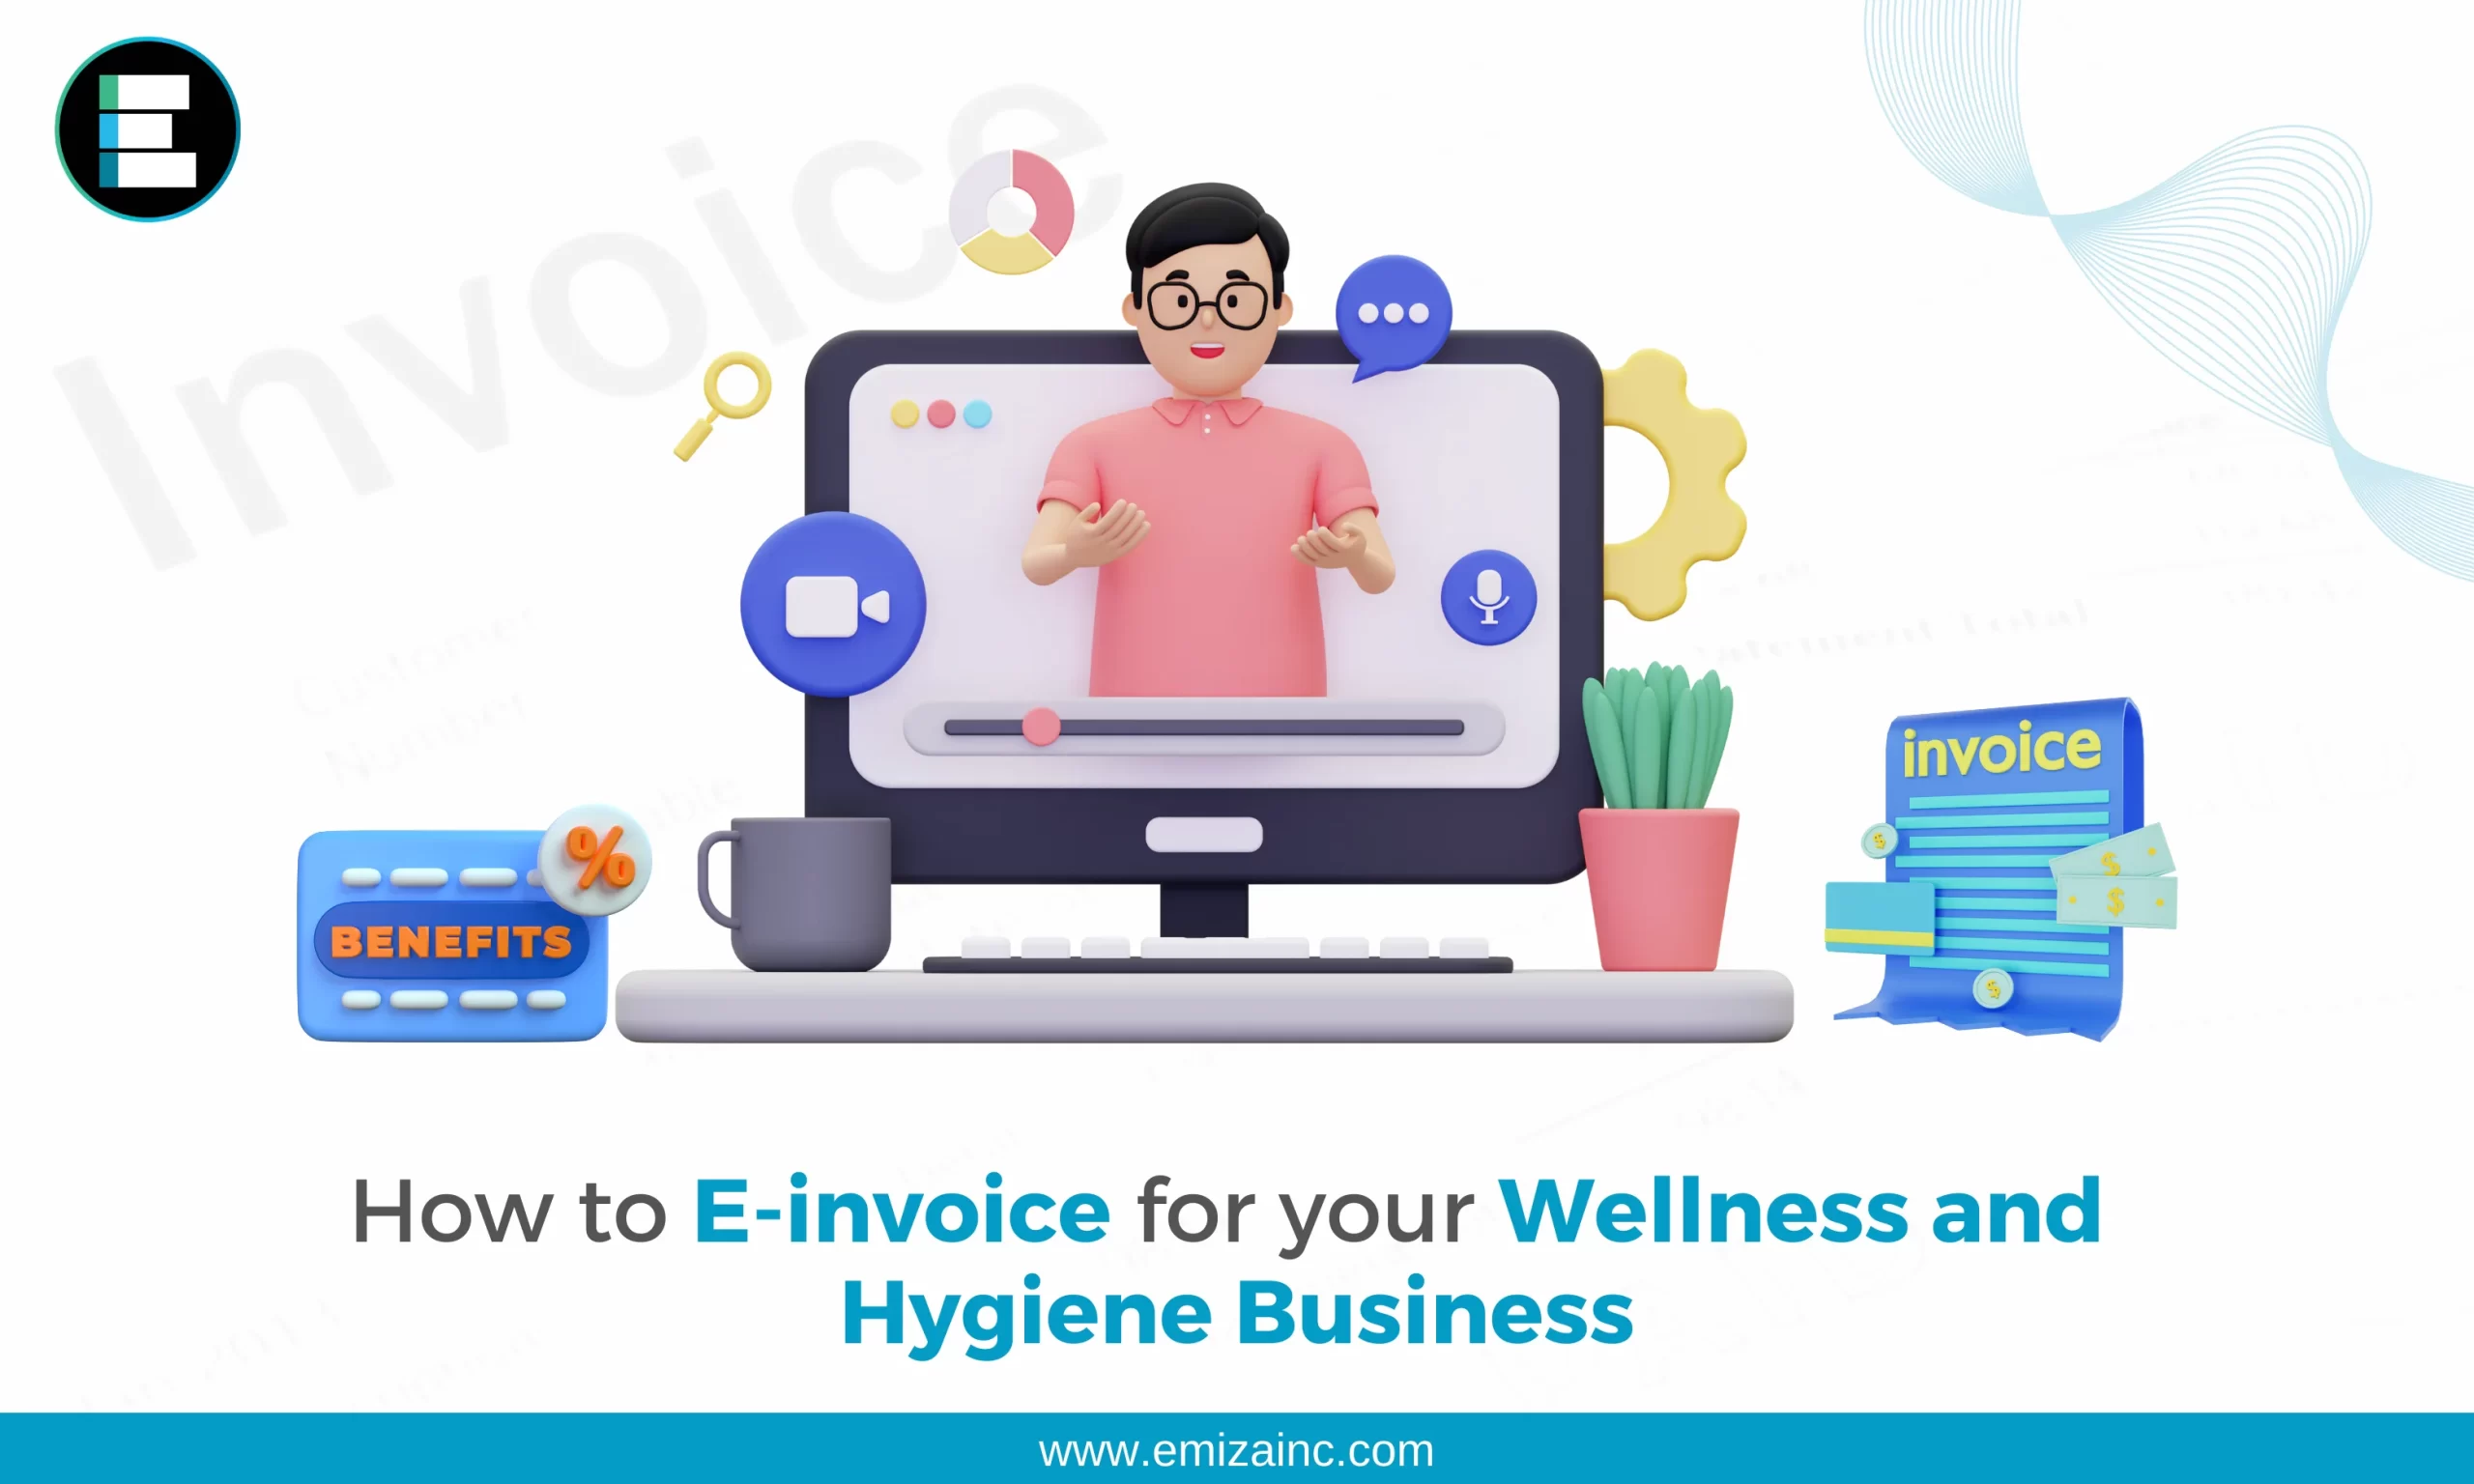 How to E-invoice for your wellness and hygiene business